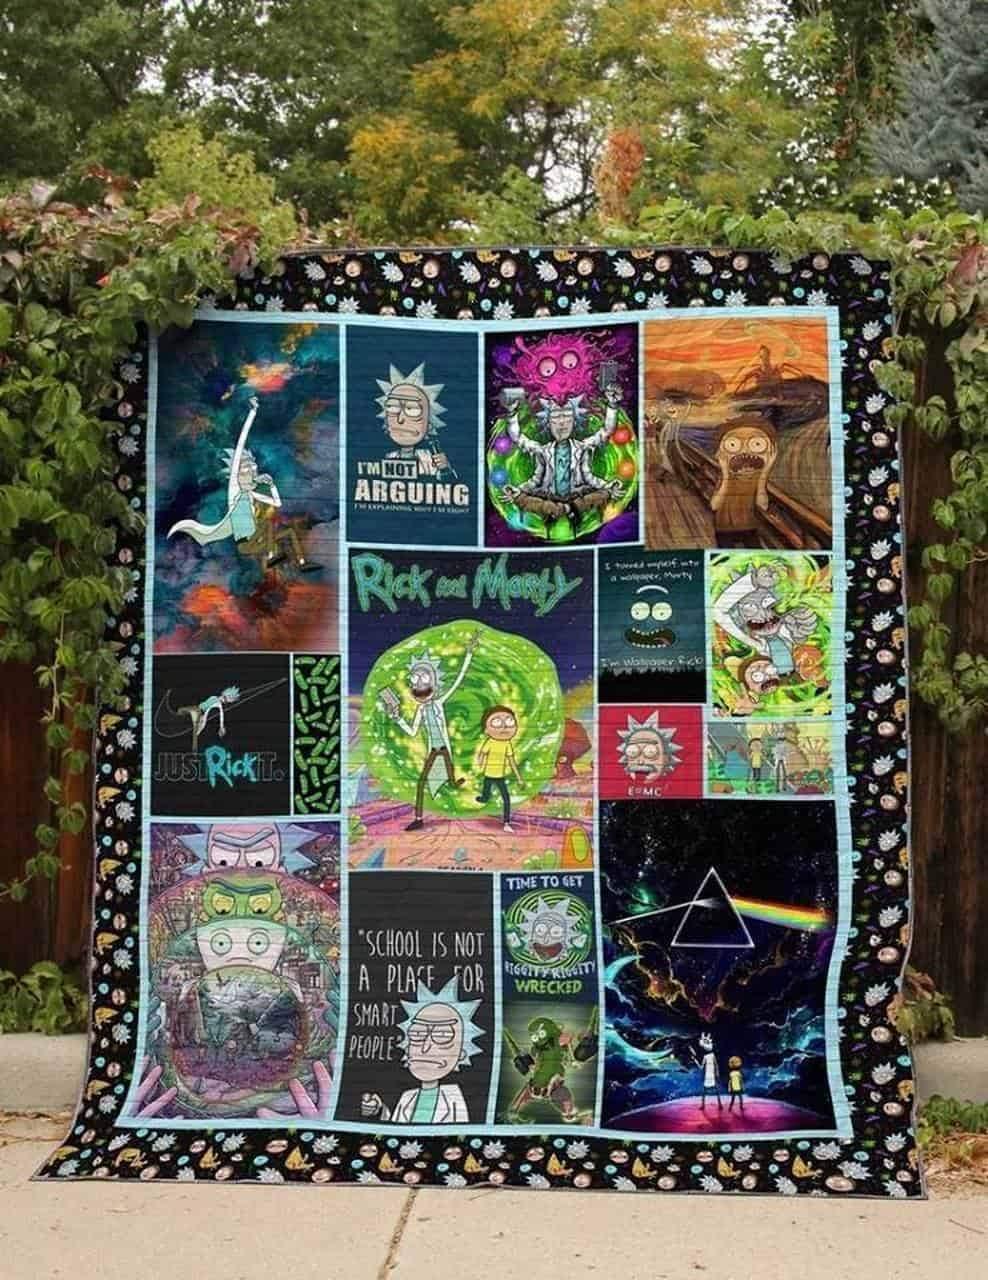 Rick and morty blanket - maria